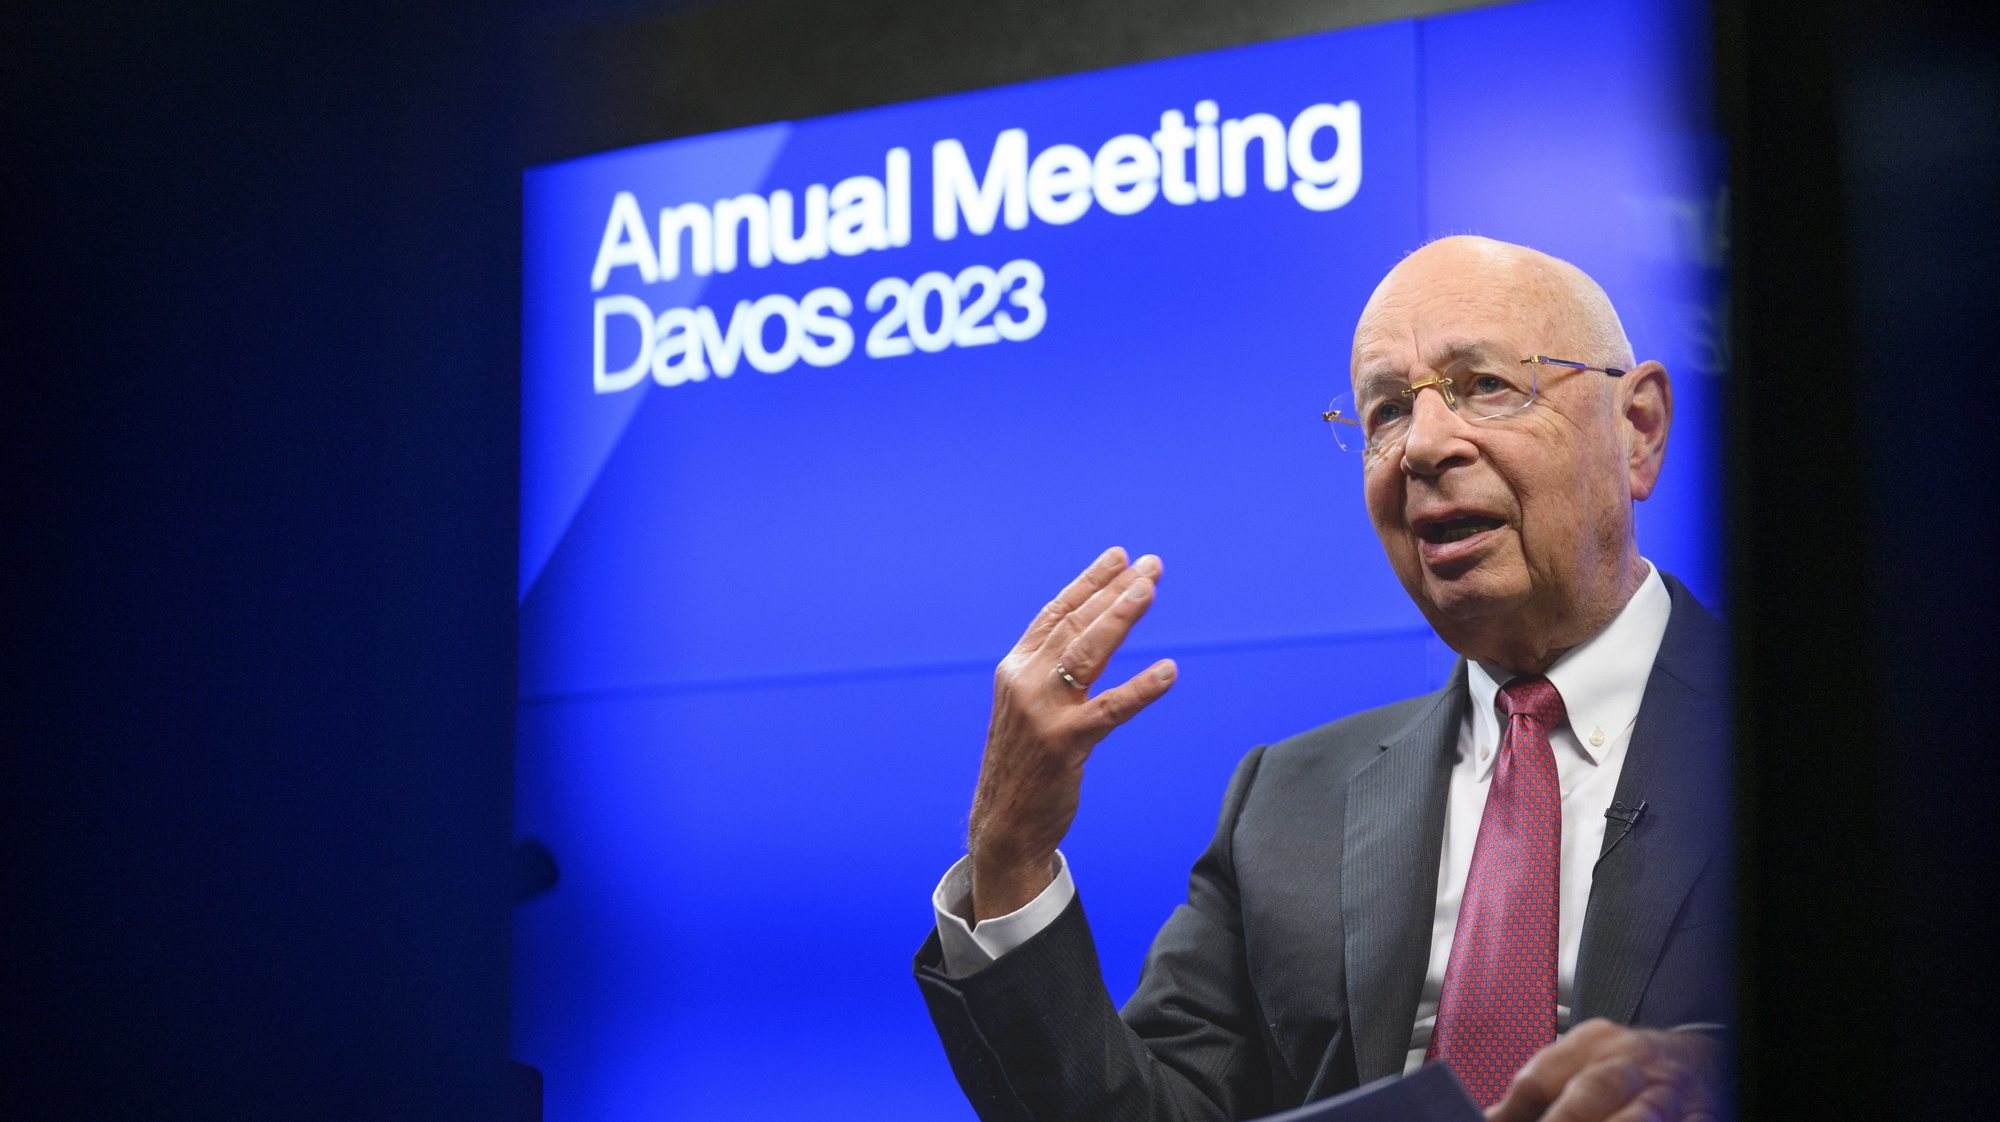 epa10398043 Klaus Schwab, Founder and Executive Chairman of the World Economic Forum (WEF), practices his speech before a virtual media briefing, in Cologny, near Geneva, Switzerland, 10 January 2023. The World Economic Forum unveiled the program for its upcomming Annual Meeting Davos 2023, Switzerland, including the key participants, themes and goals. The WEF 2023 will take place from 16 to 20 January.  EPA/LAURENT GILLIERON